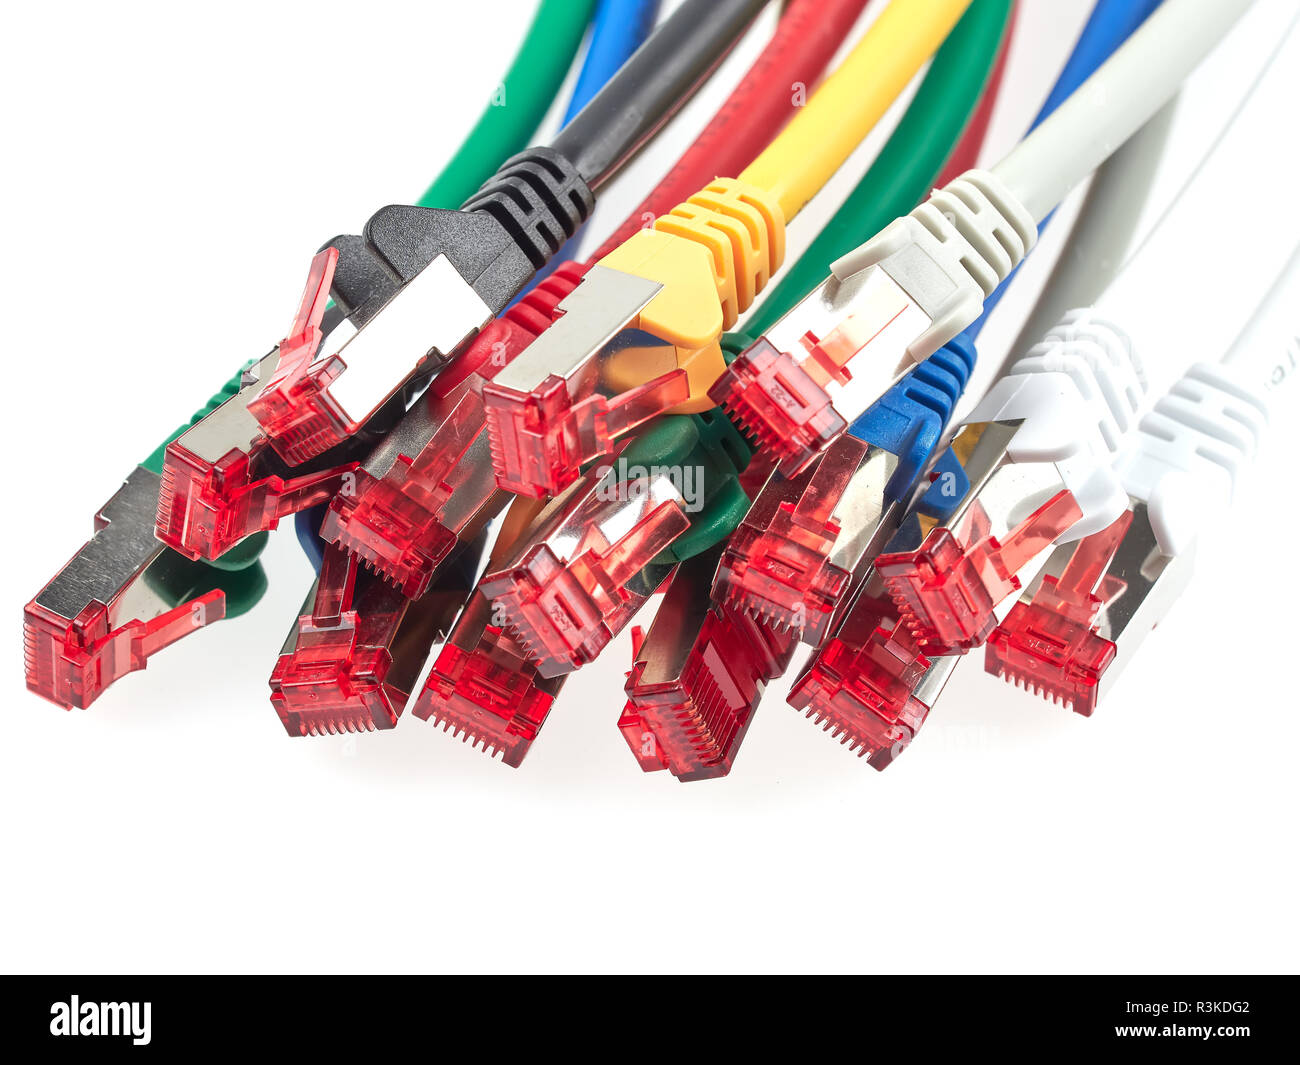 Ethernet patch cables with RJ45 connectors are used to route signals between various network devices Stock Photo